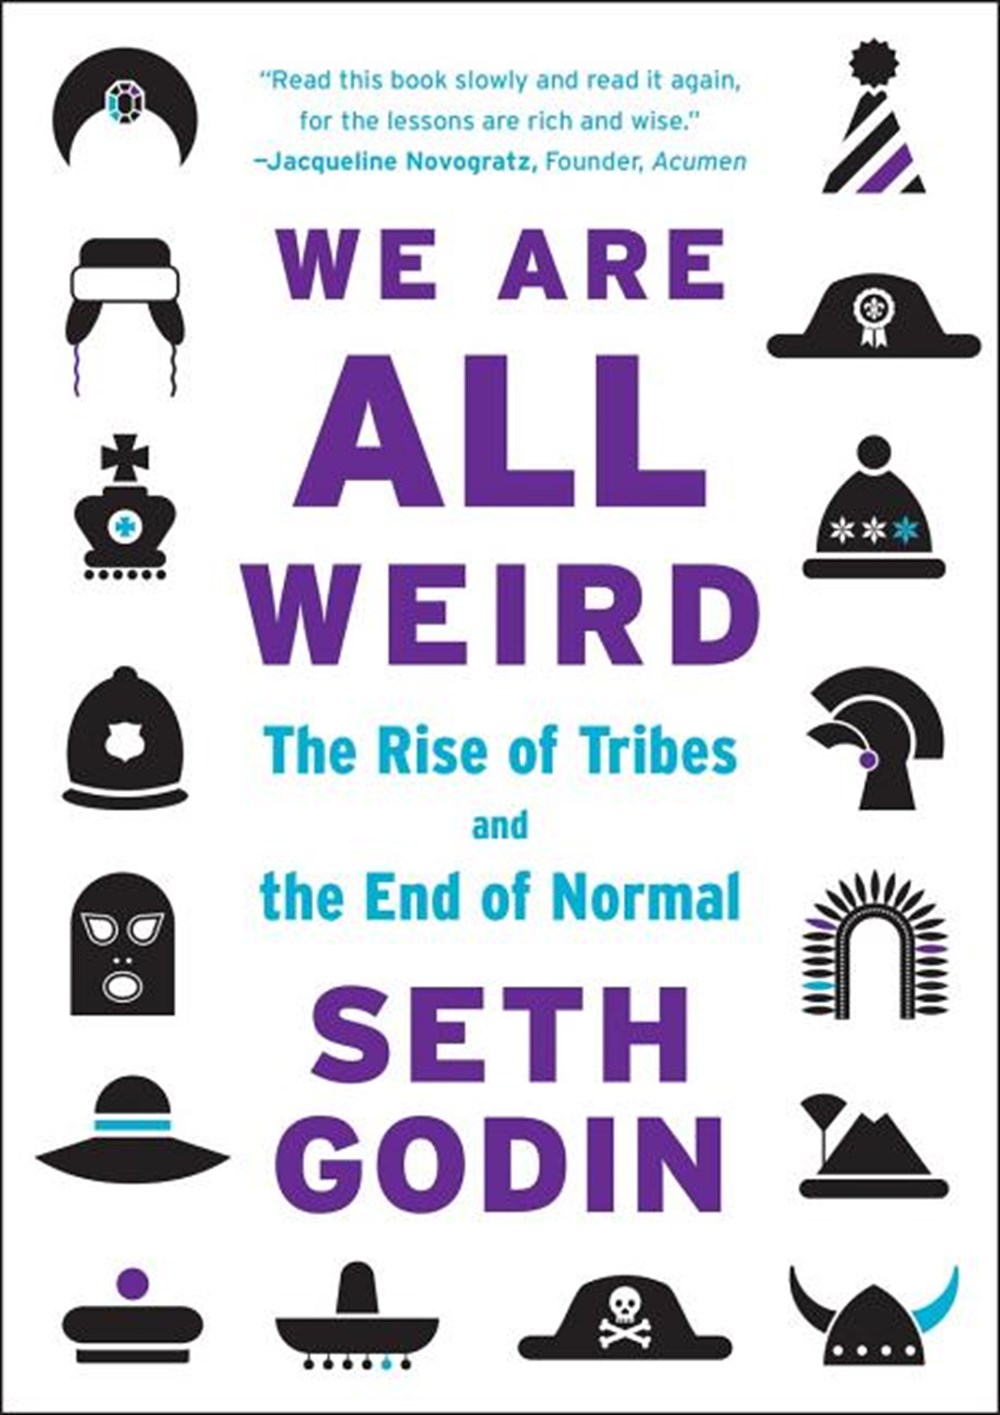 We Are All Weird The Rise of Tribes and the End of Normal